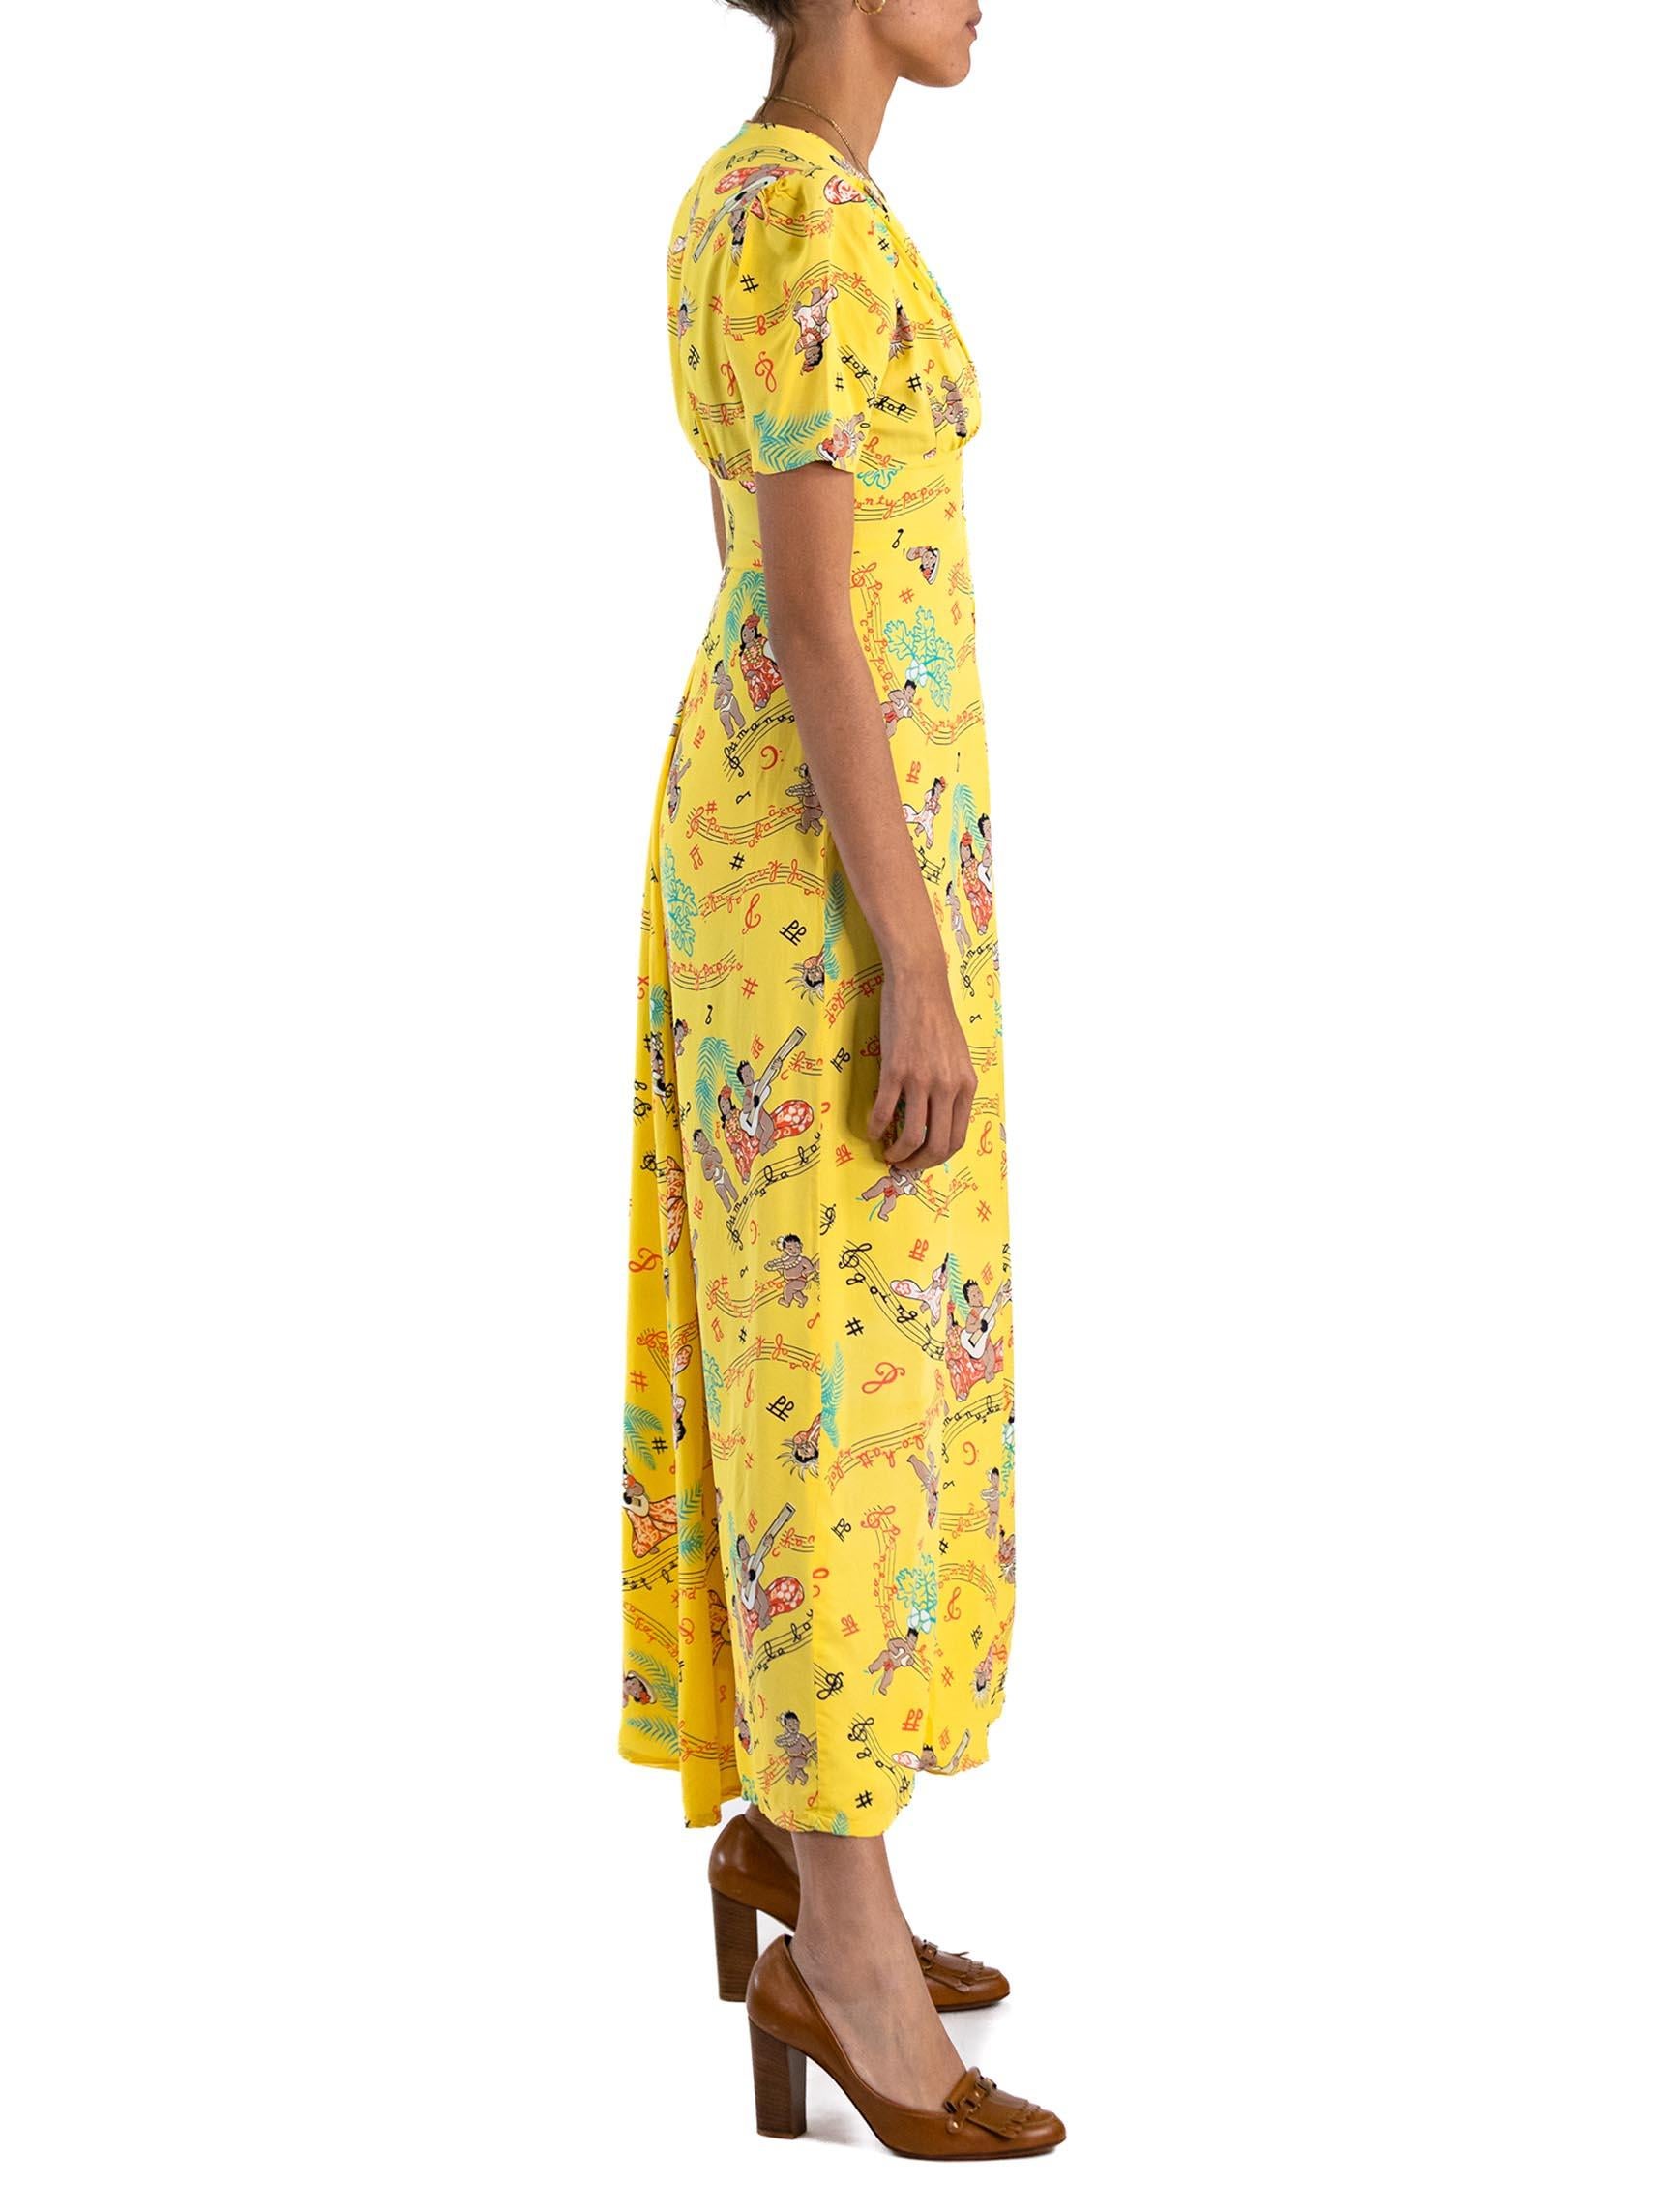 1940S Mustard Yellow Cold Rayon Hawaiin Novelty Print Dress In Excellent Condition For Sale In New York, NY